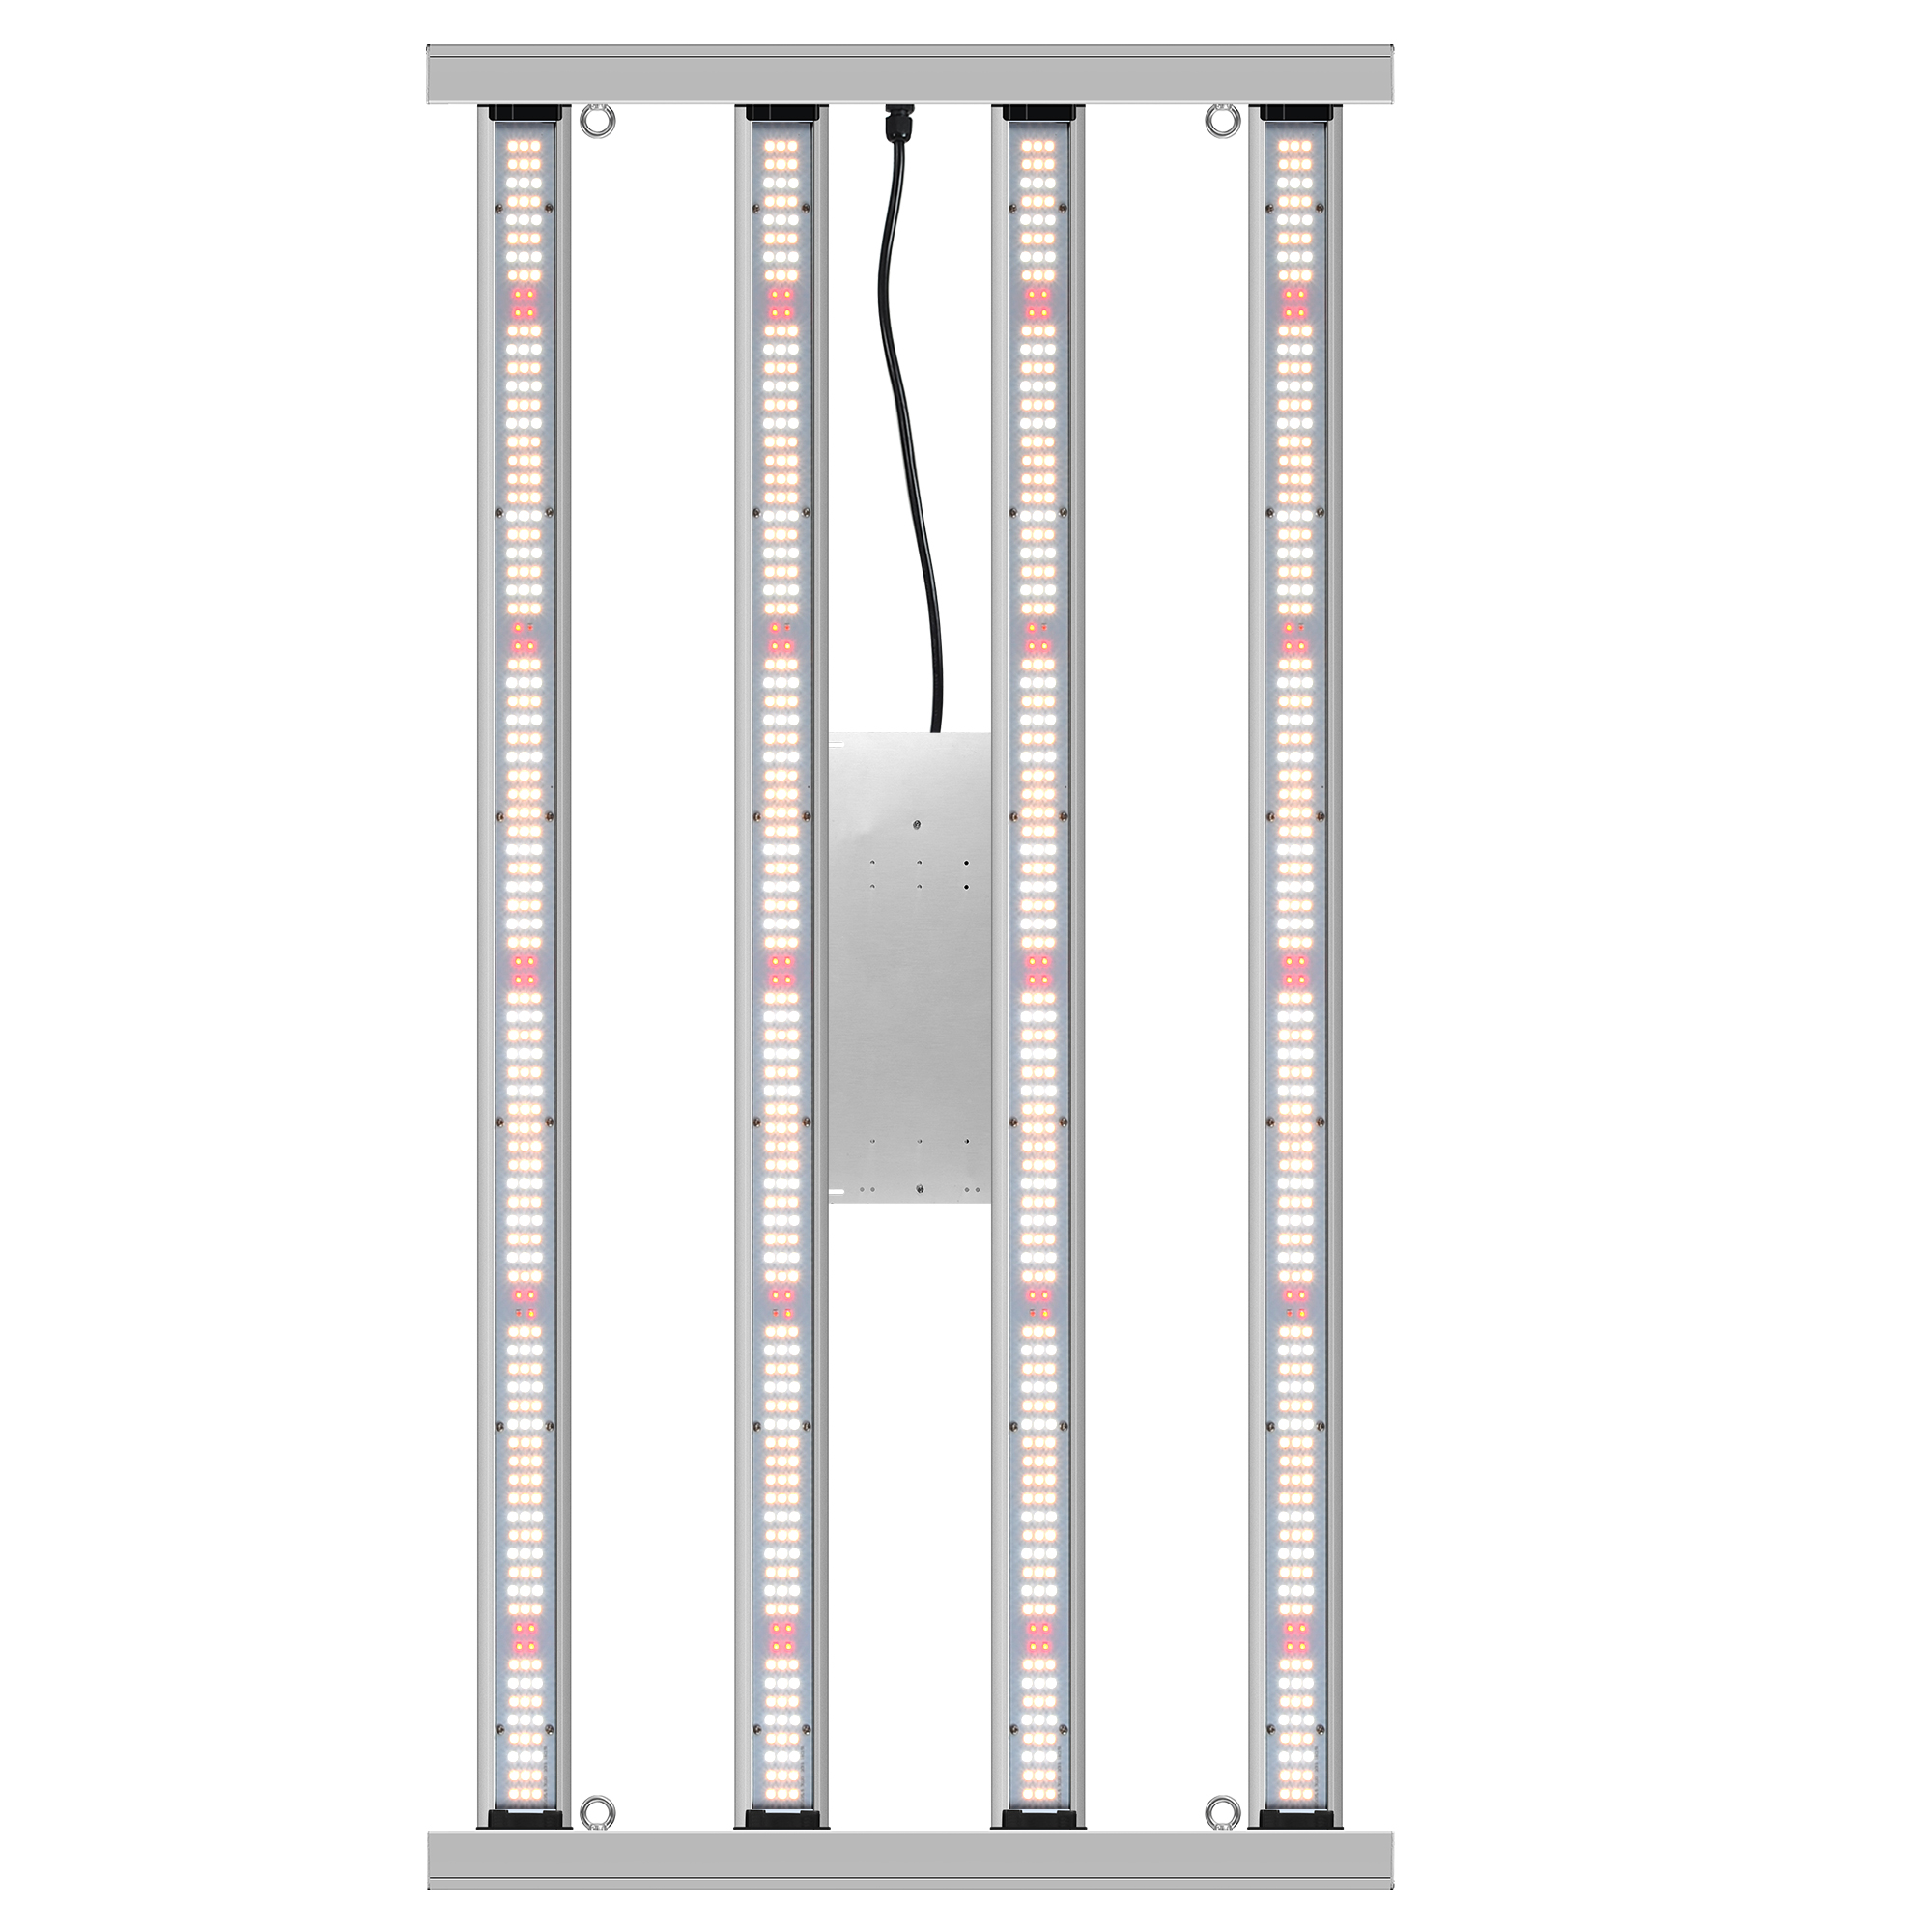 High Quality Efficient Bar LED Grow Light with Samsung Chips and Meanwell Driver